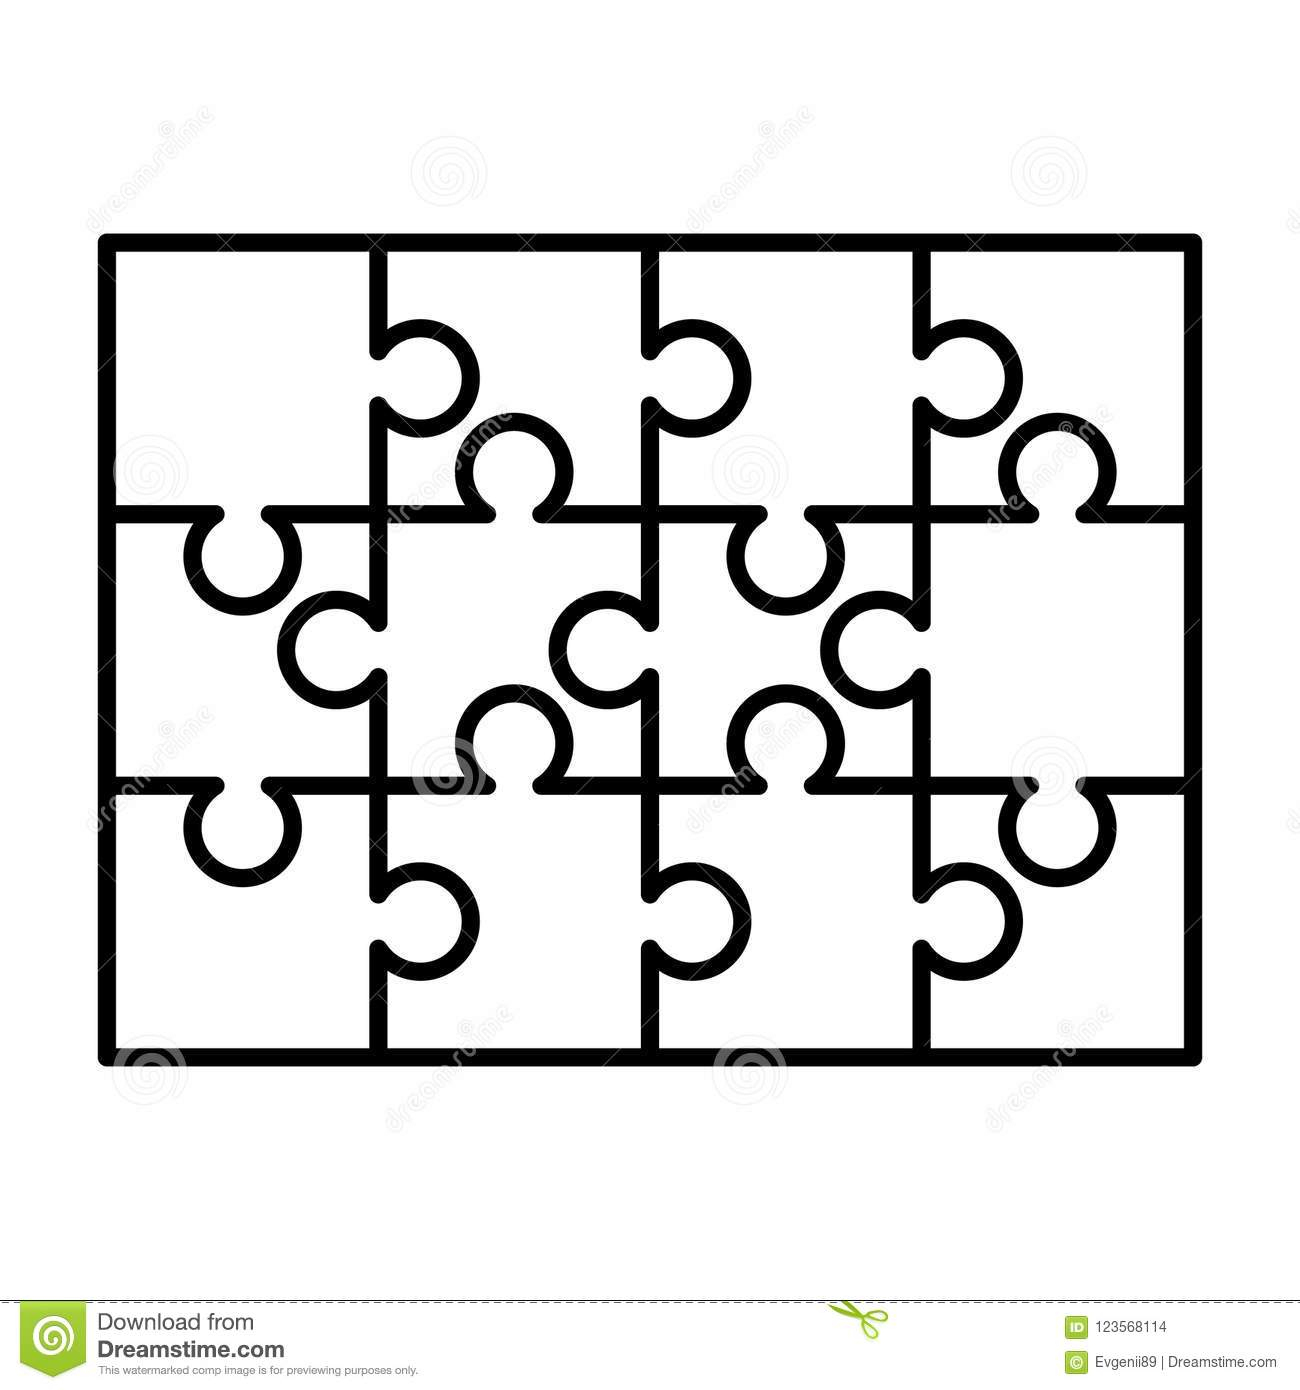 12 White Puzzles Pieces Arranged In A Rectangle Shape. Jigsaw Puzzle - Print Puzzle From Photo